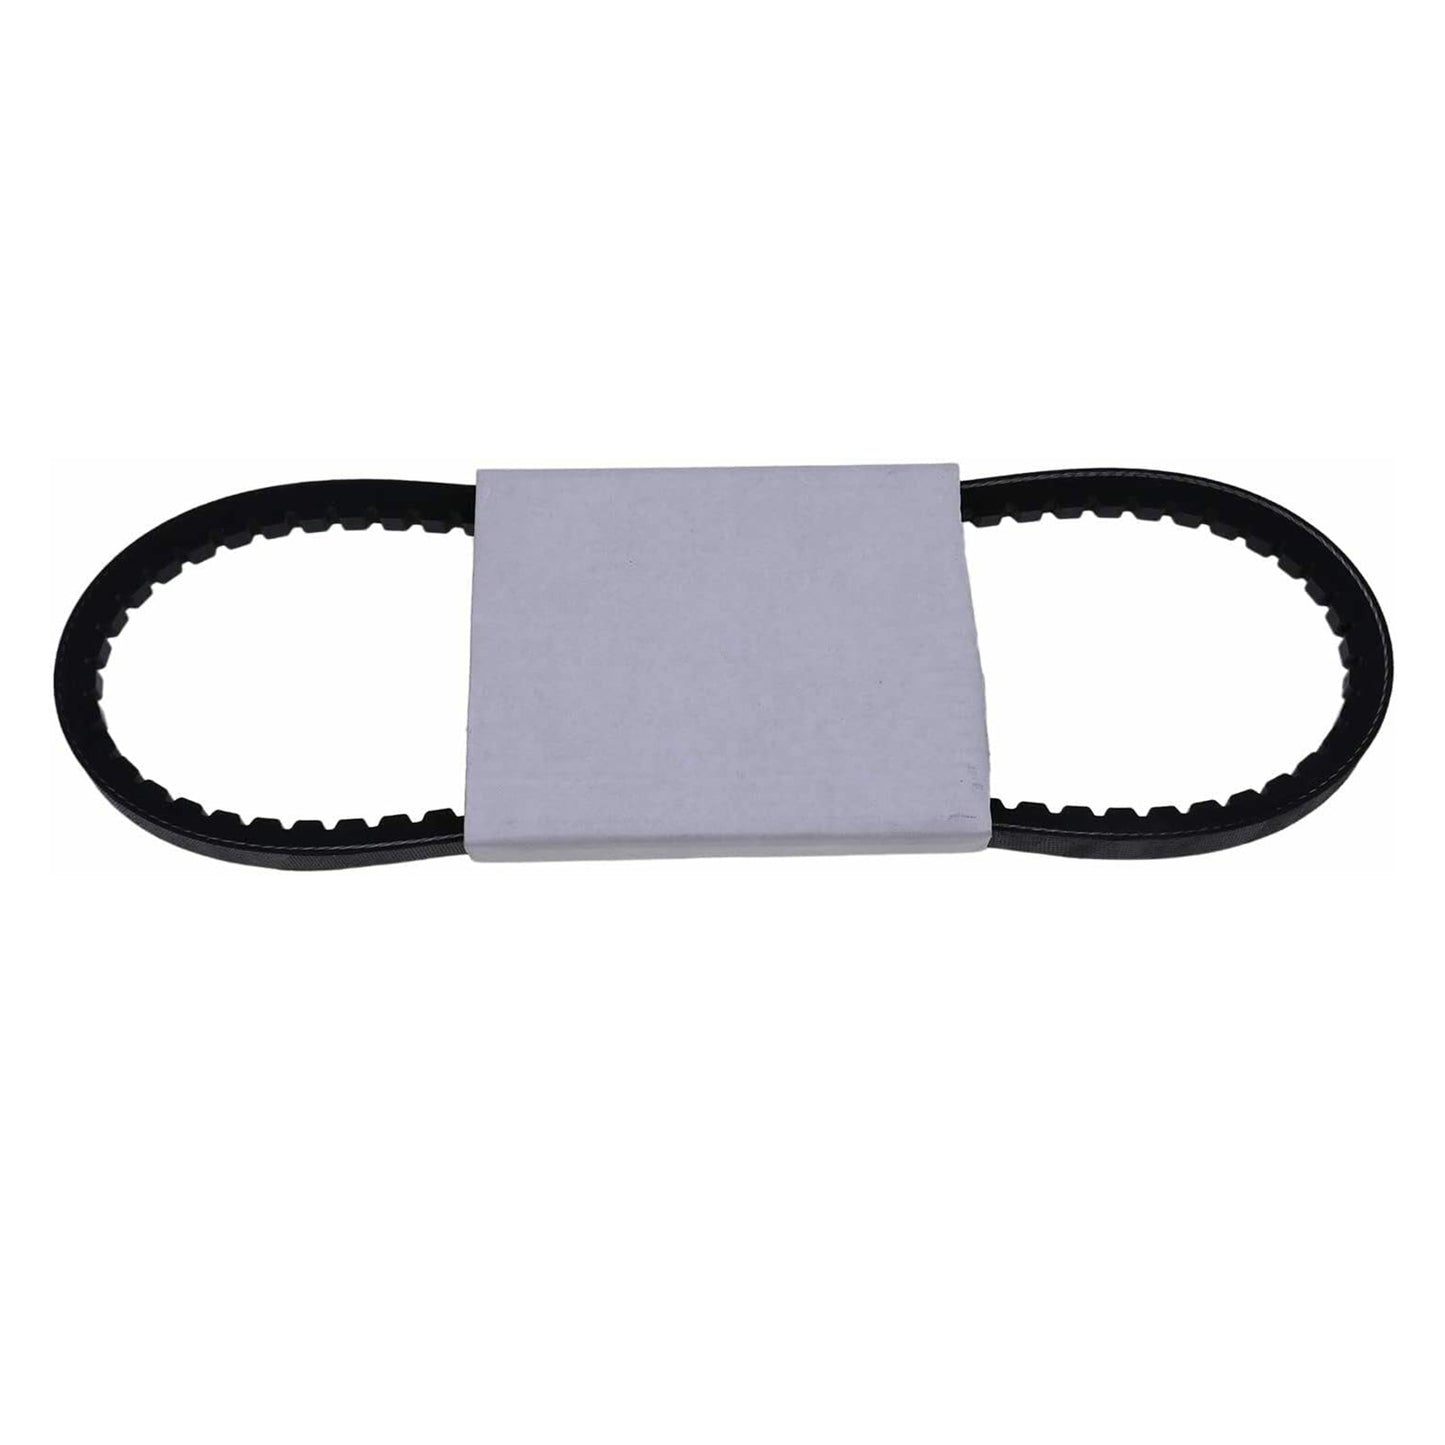 78-1492 Belt Compatible With Thermo King Tripac APU Evolution Tri-Pac TK 9170C56H29